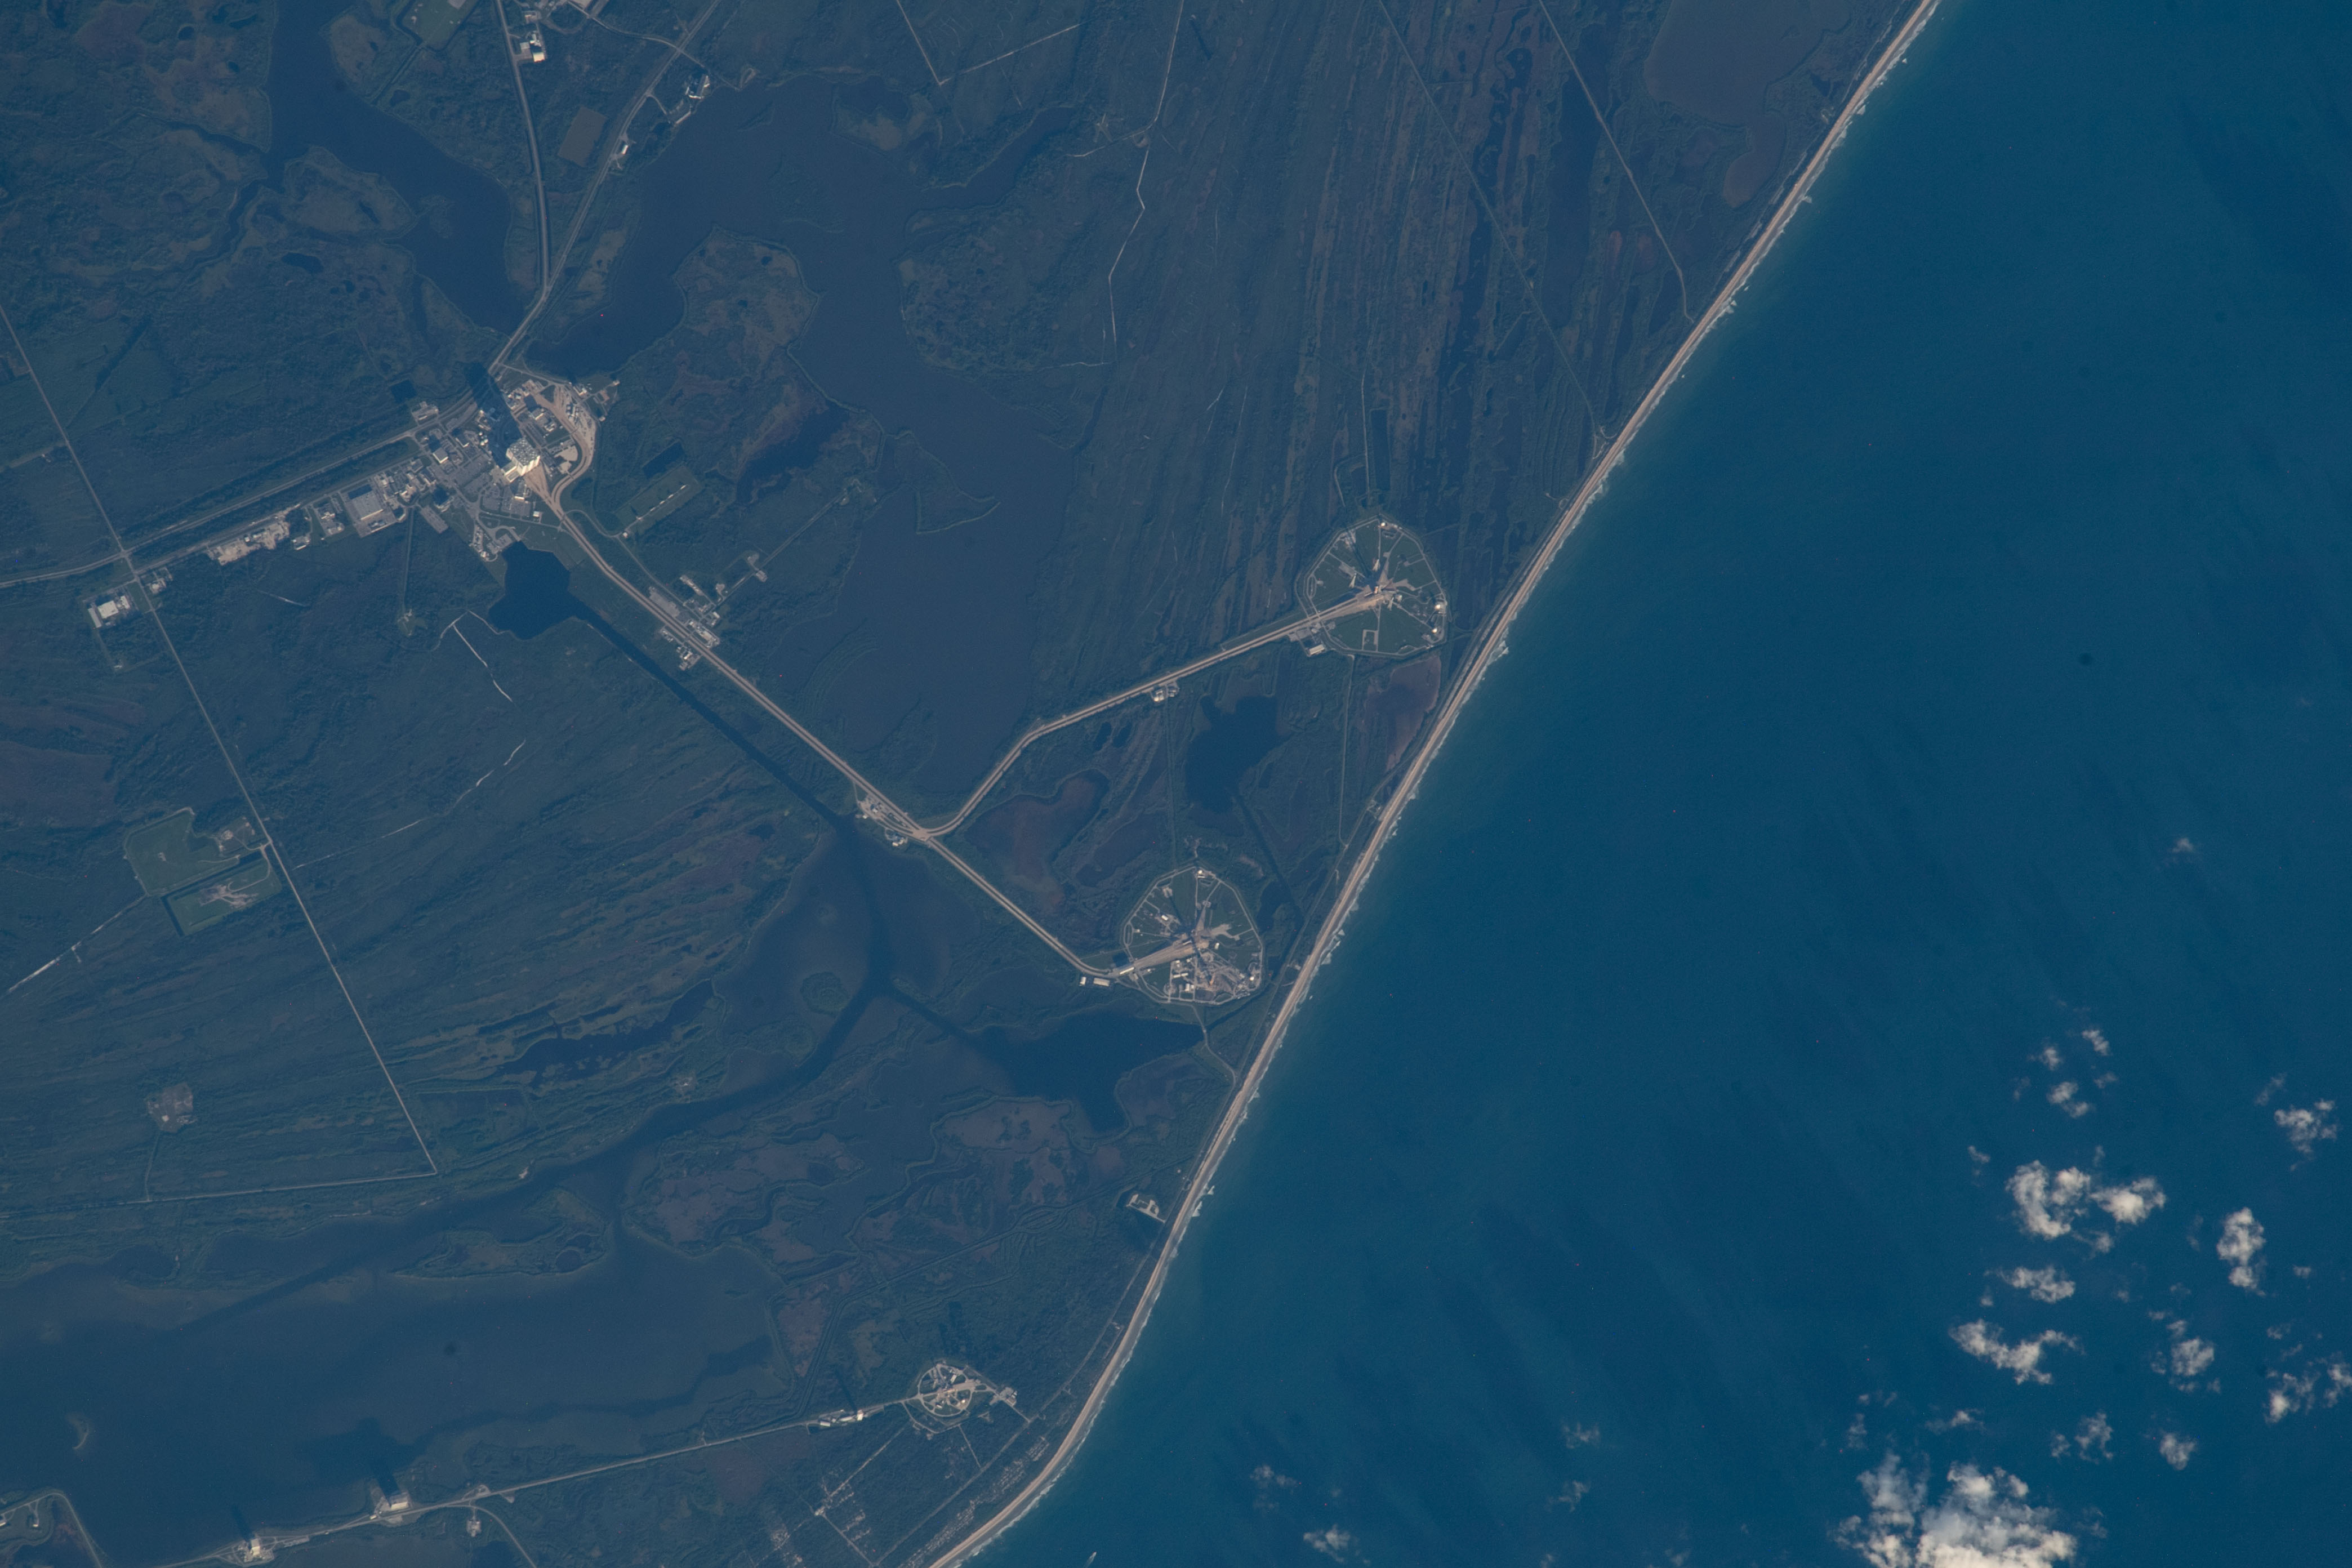 This image, taken from the space station as it orbits 259 miles above the Atlantic Ocean, shows Kennedy Space Center's launch pads, 39A and 39B, on Merritt Island in Florida. 